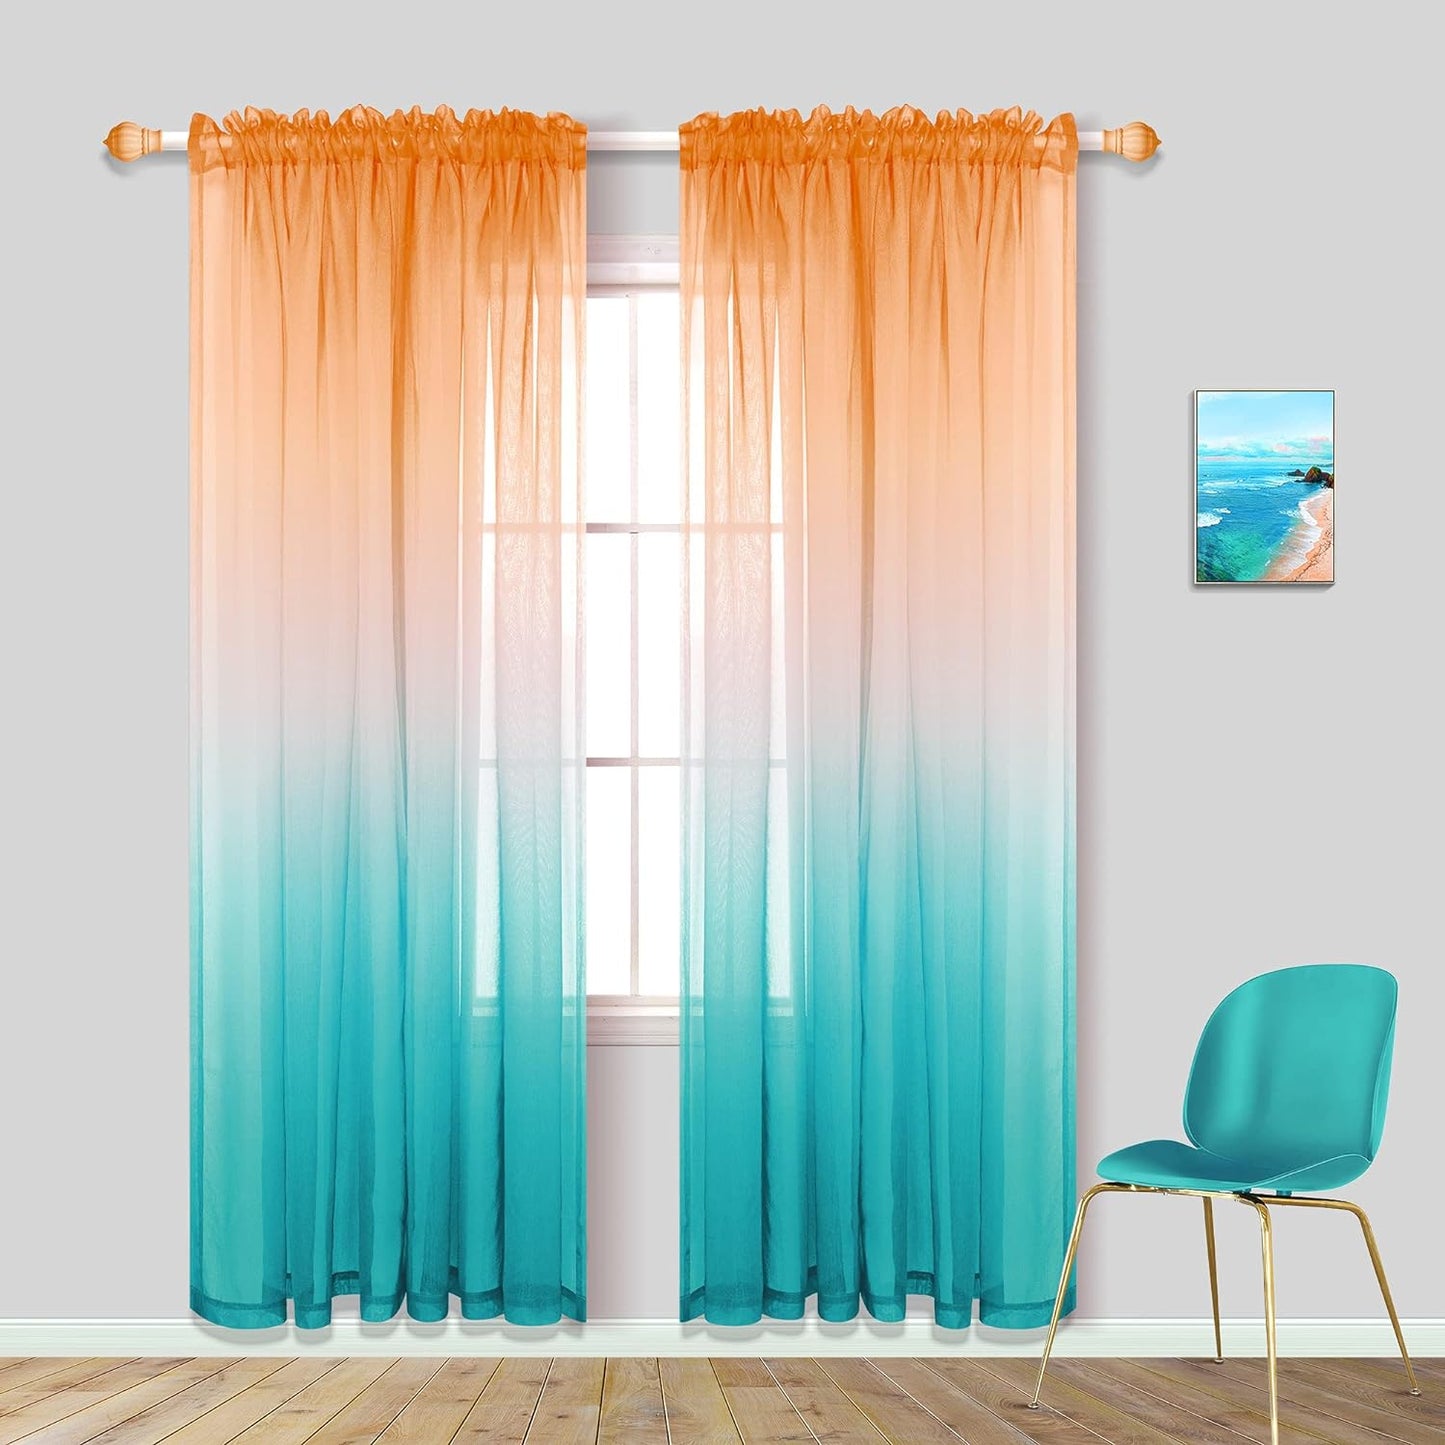 Kitchen Curtains Yellow Lemon and Light Grey Sheer Bathroom Window Curtains 42 X 45 Inch Length Sunflower Yellow and Gray  PITALK TEXTILE Orange And Turquoise 52X84 